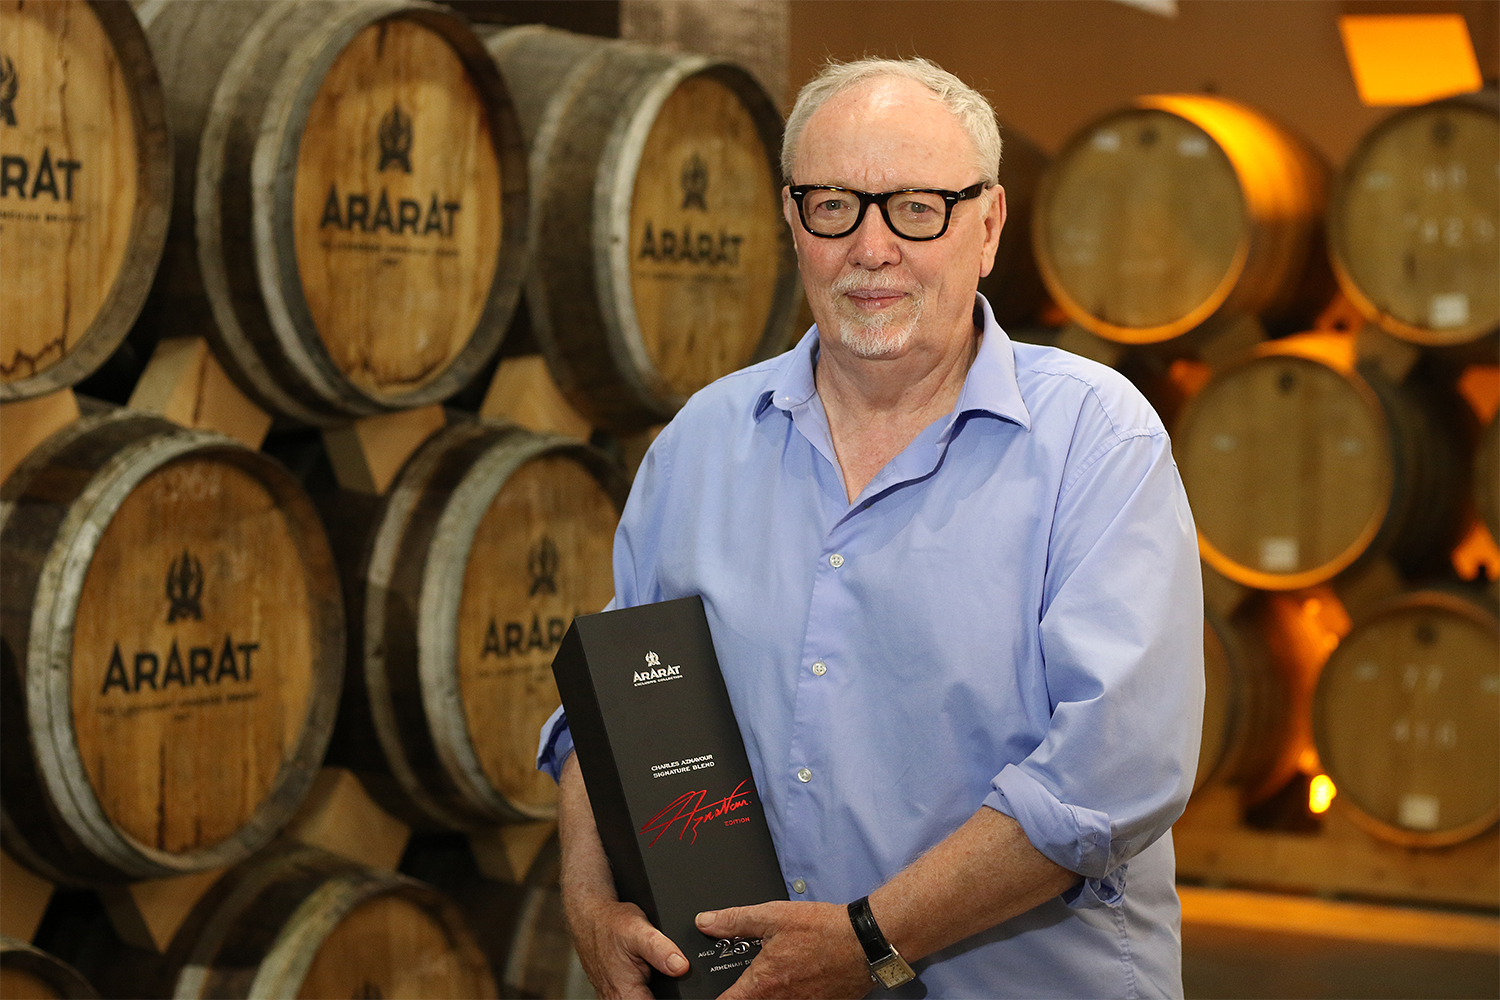 Terry George presented presented with ARARAT Charles Aznavour Signature Blend brandy